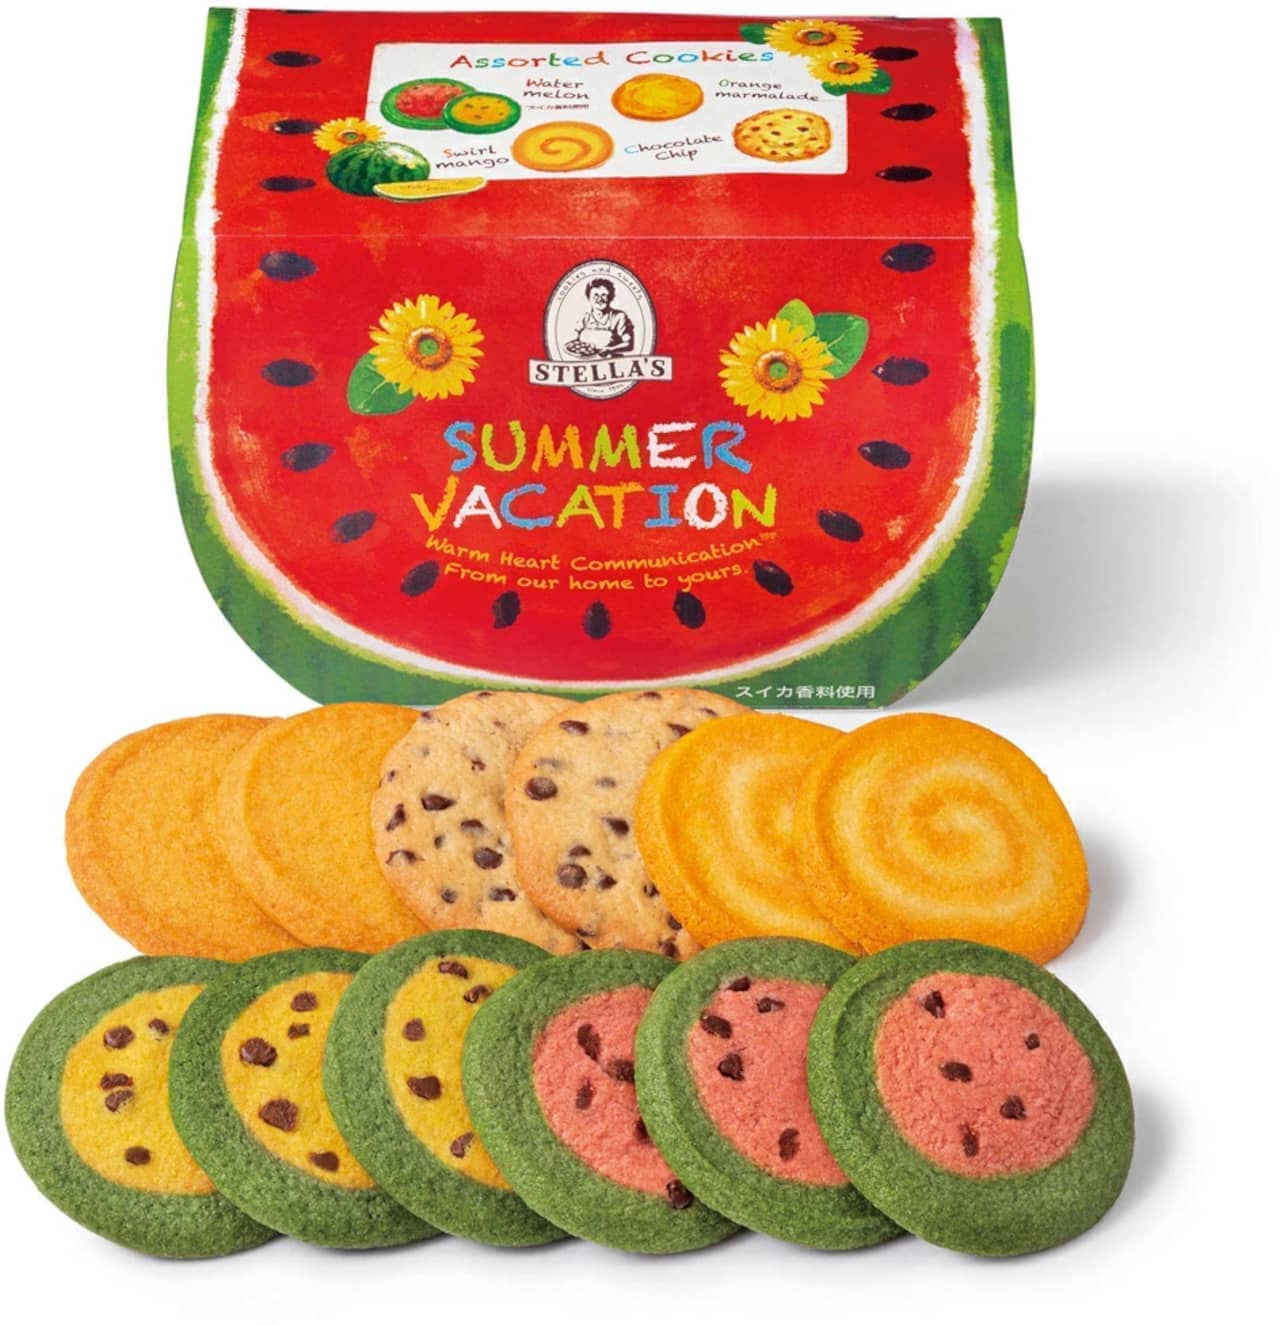 Aunt Stella's cookie "Watermelon Gift" for a limited time